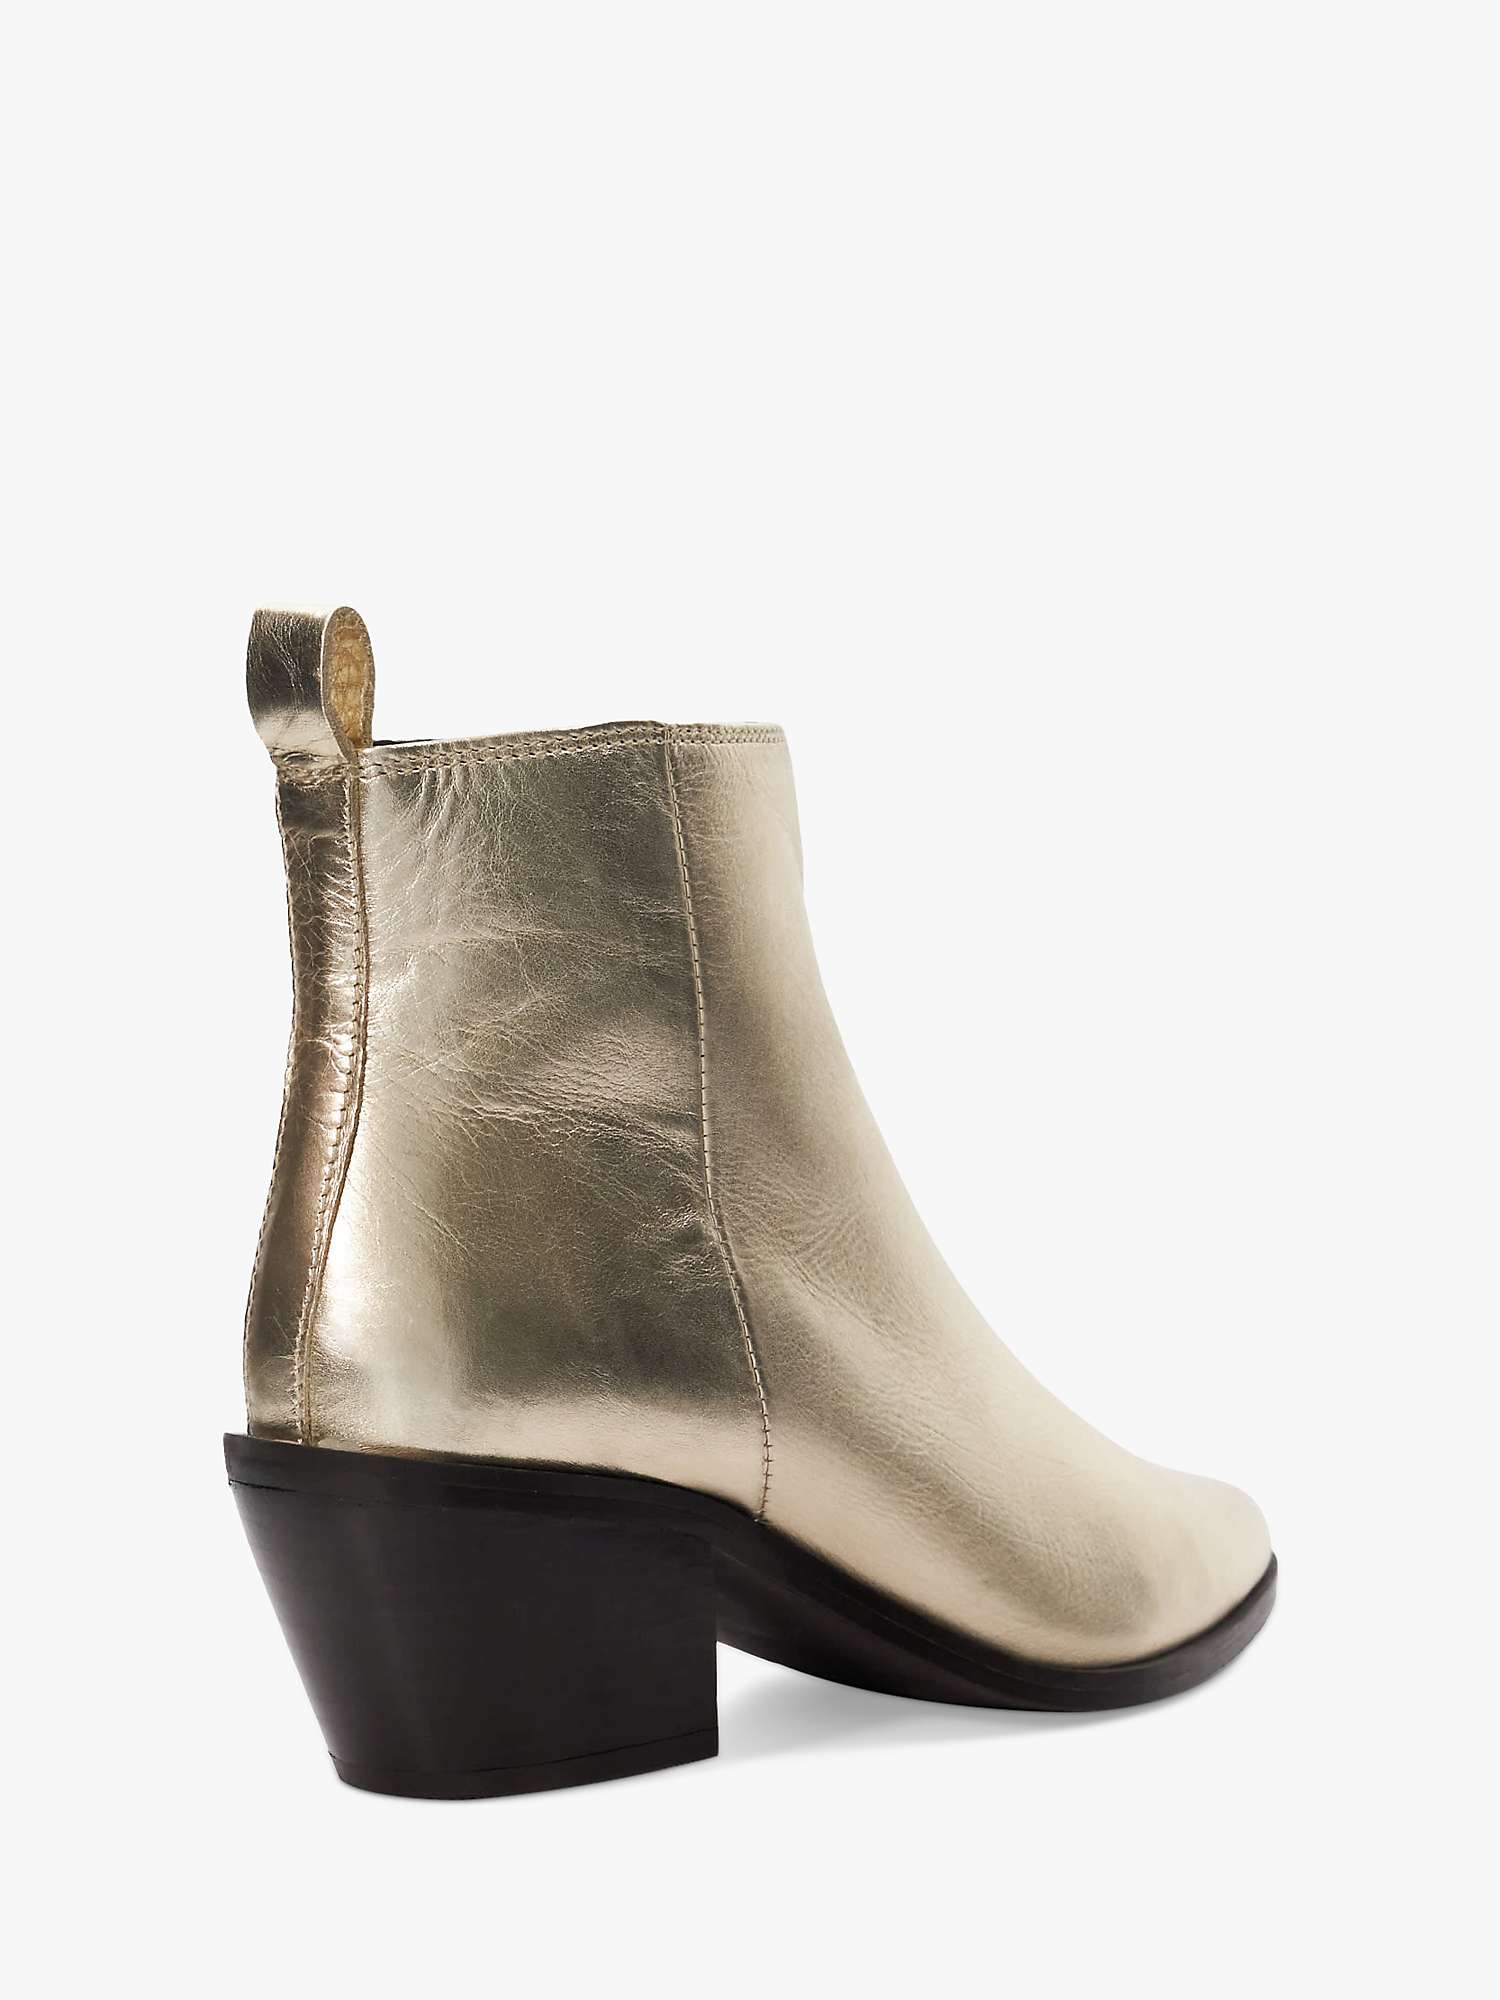 Buy Dune Papz Leather Ankle Boots Online at johnlewis.com